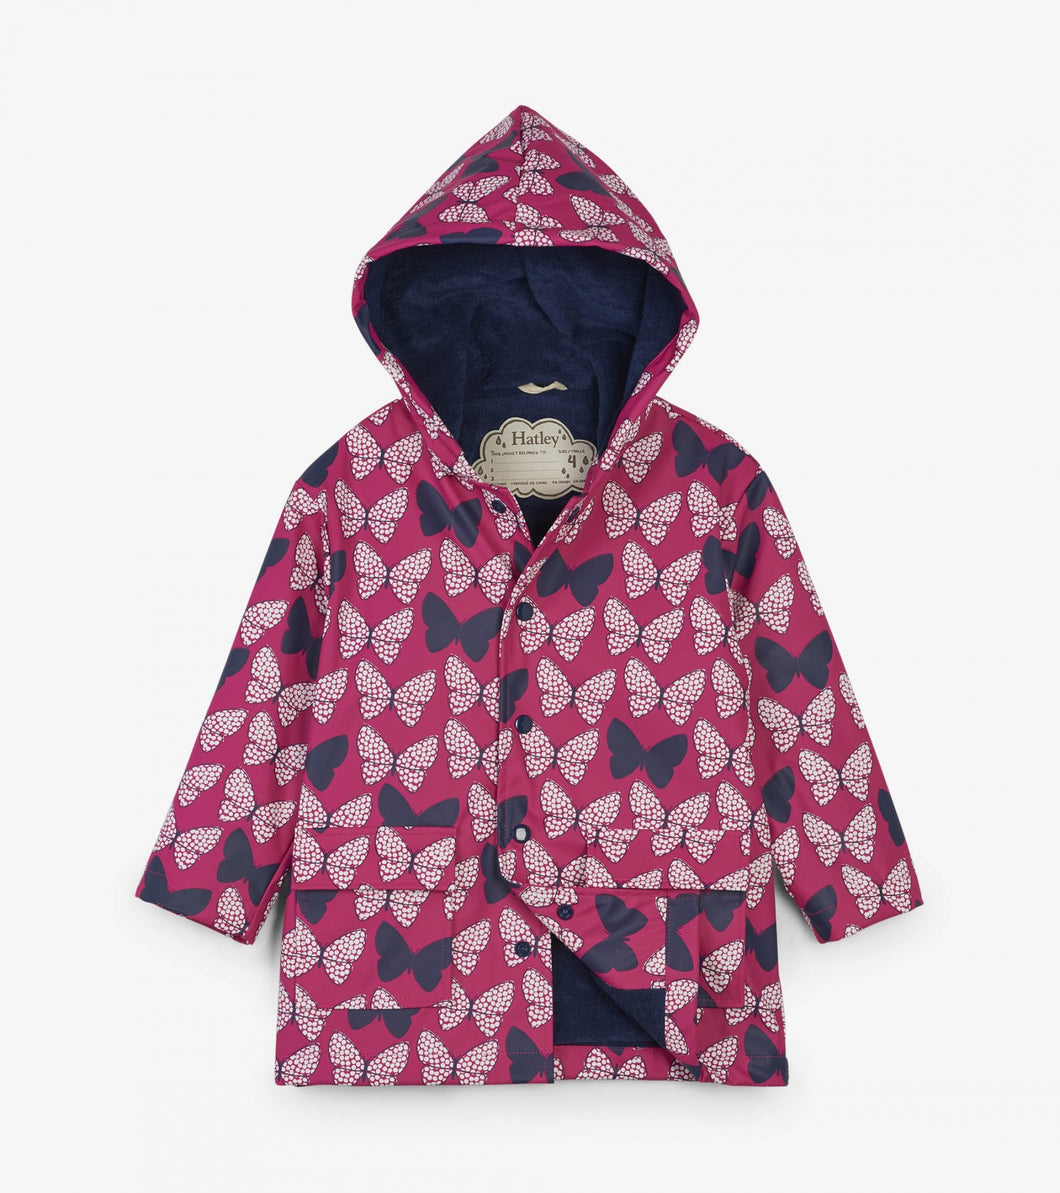 Hatley Raincoat - Spotted Butterfly